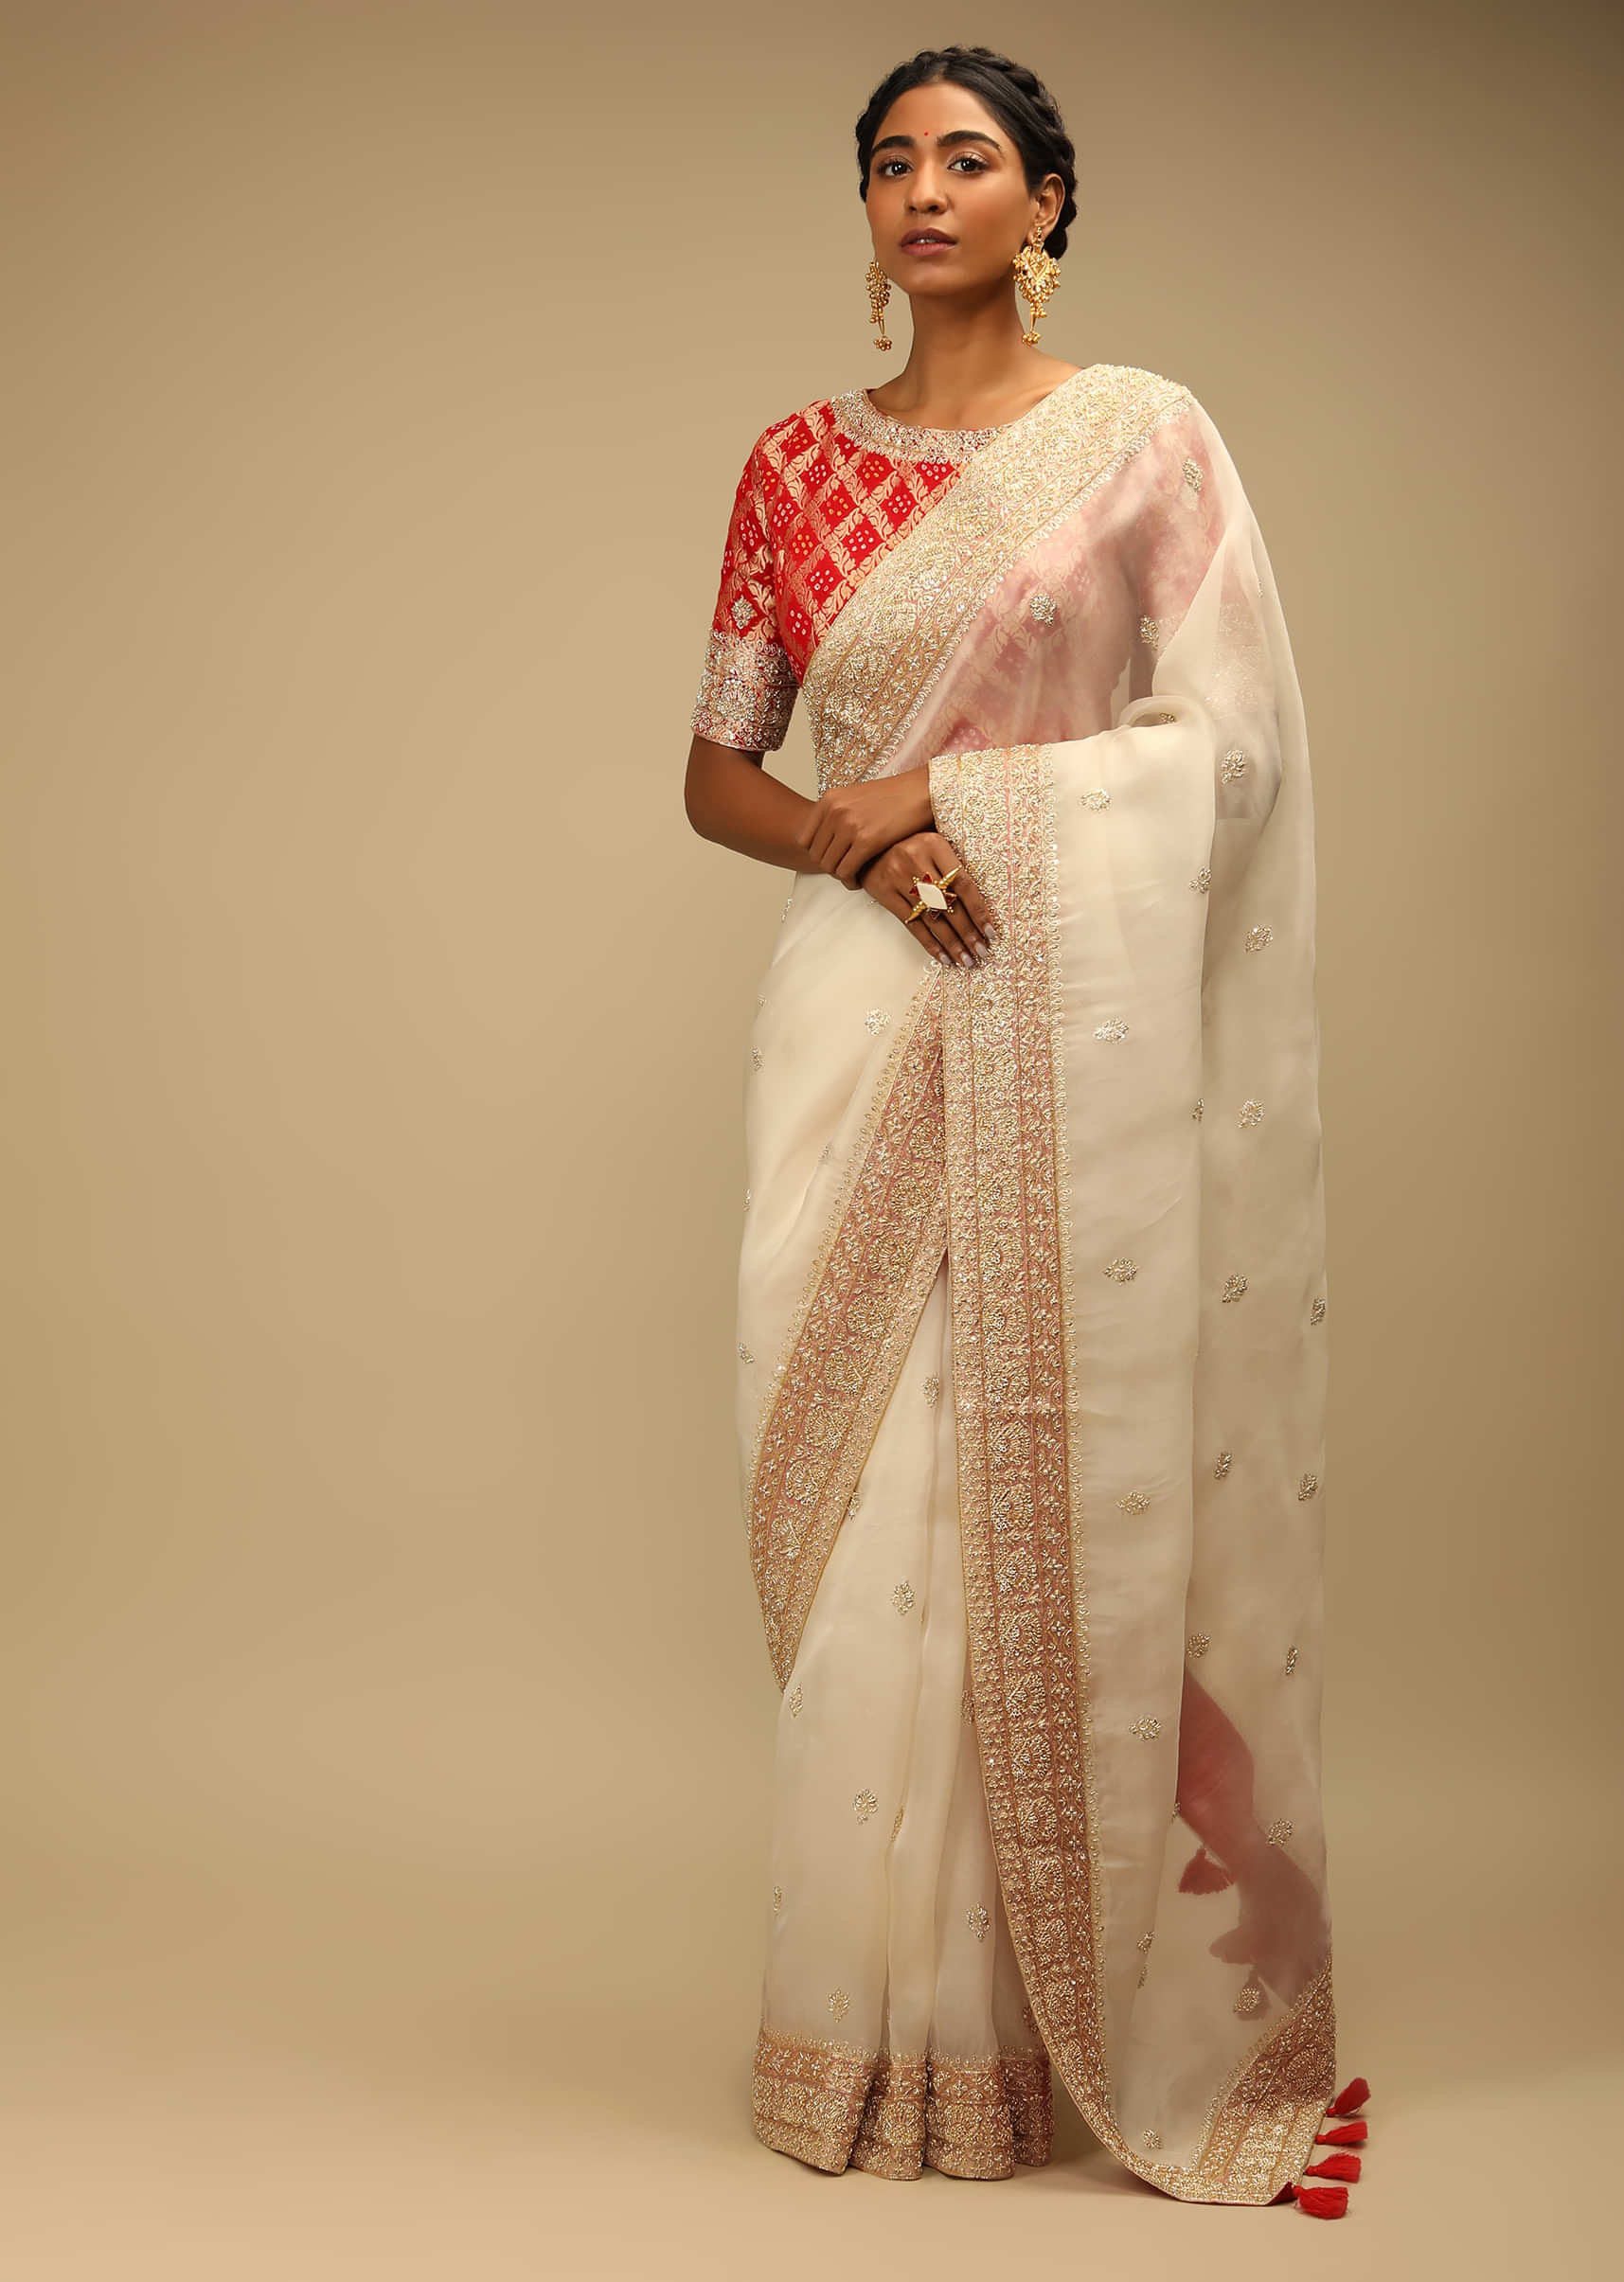 Aggregate more than 136 white saree and red blouse